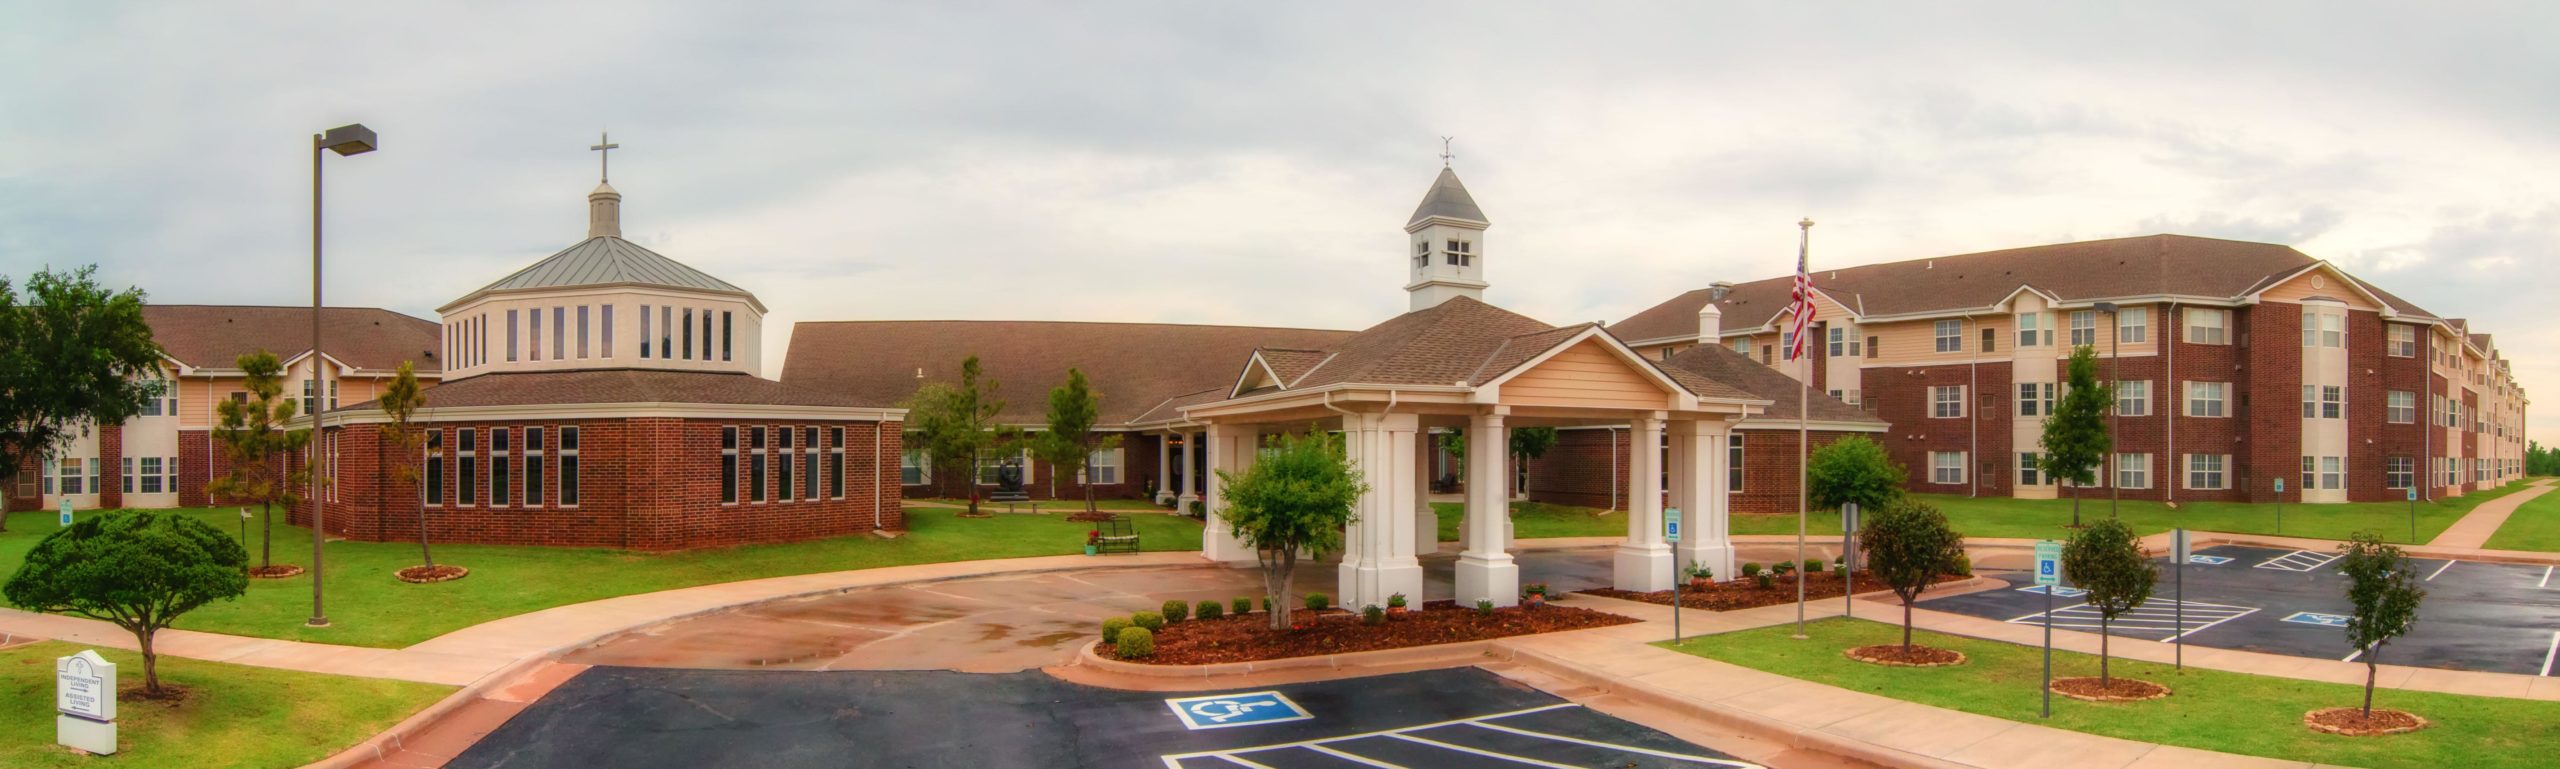 Saint Ann Retirement Center Assisted Living and Independent Living